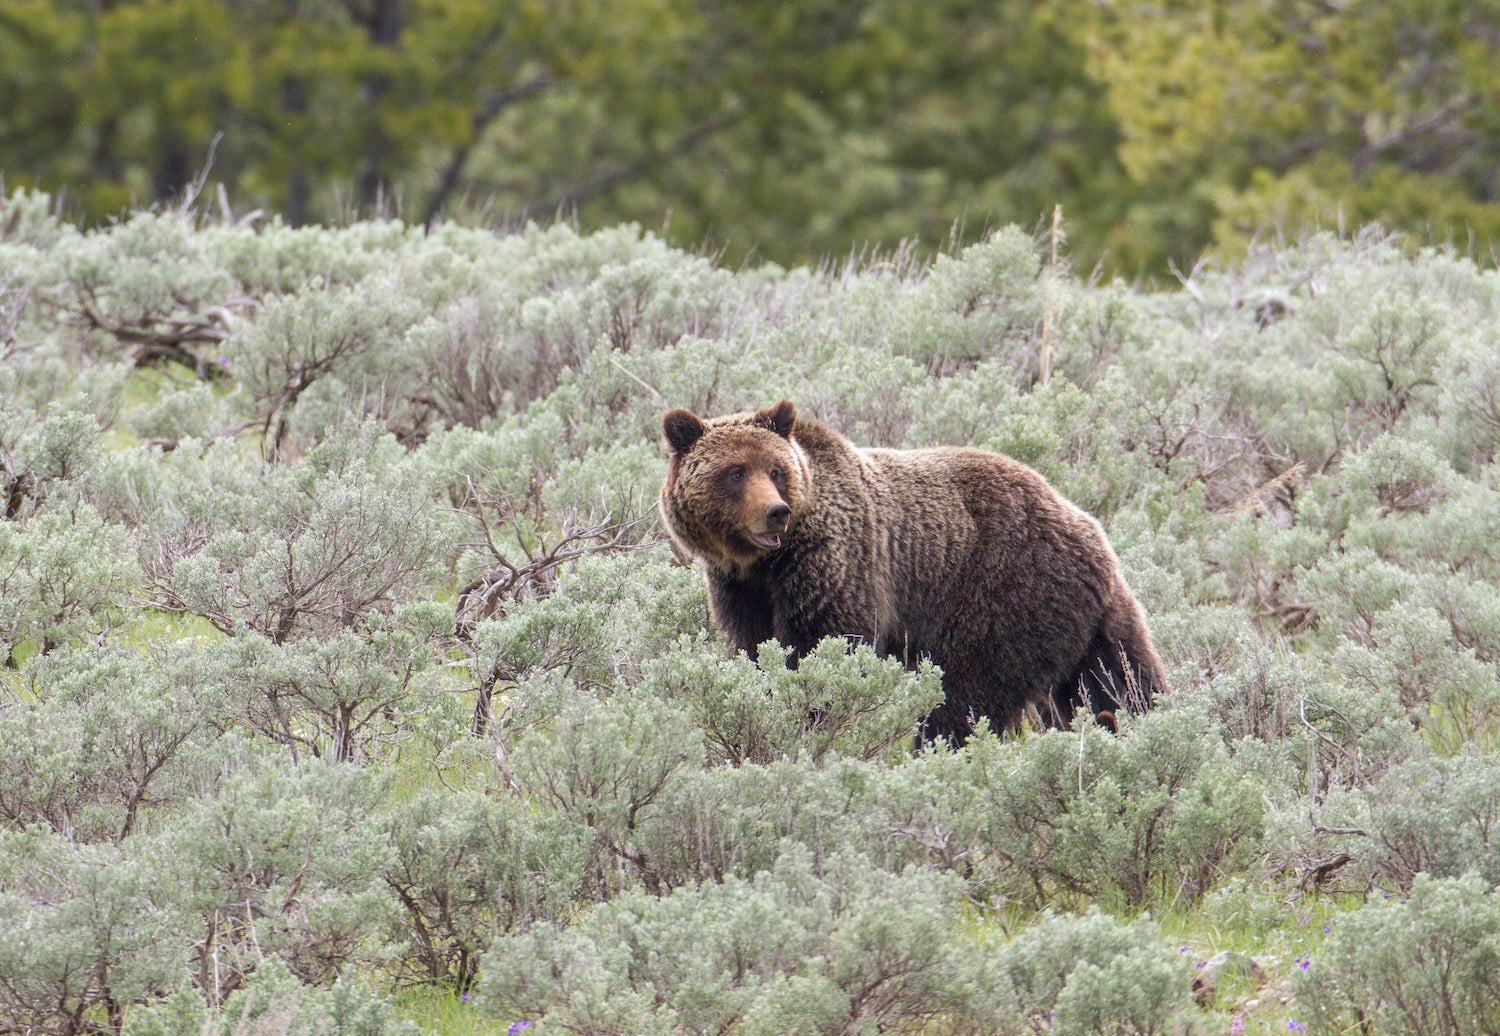 B.C. Outfitters Seek Lawsuit to Challenge Grizzly Bear Hunting Ban